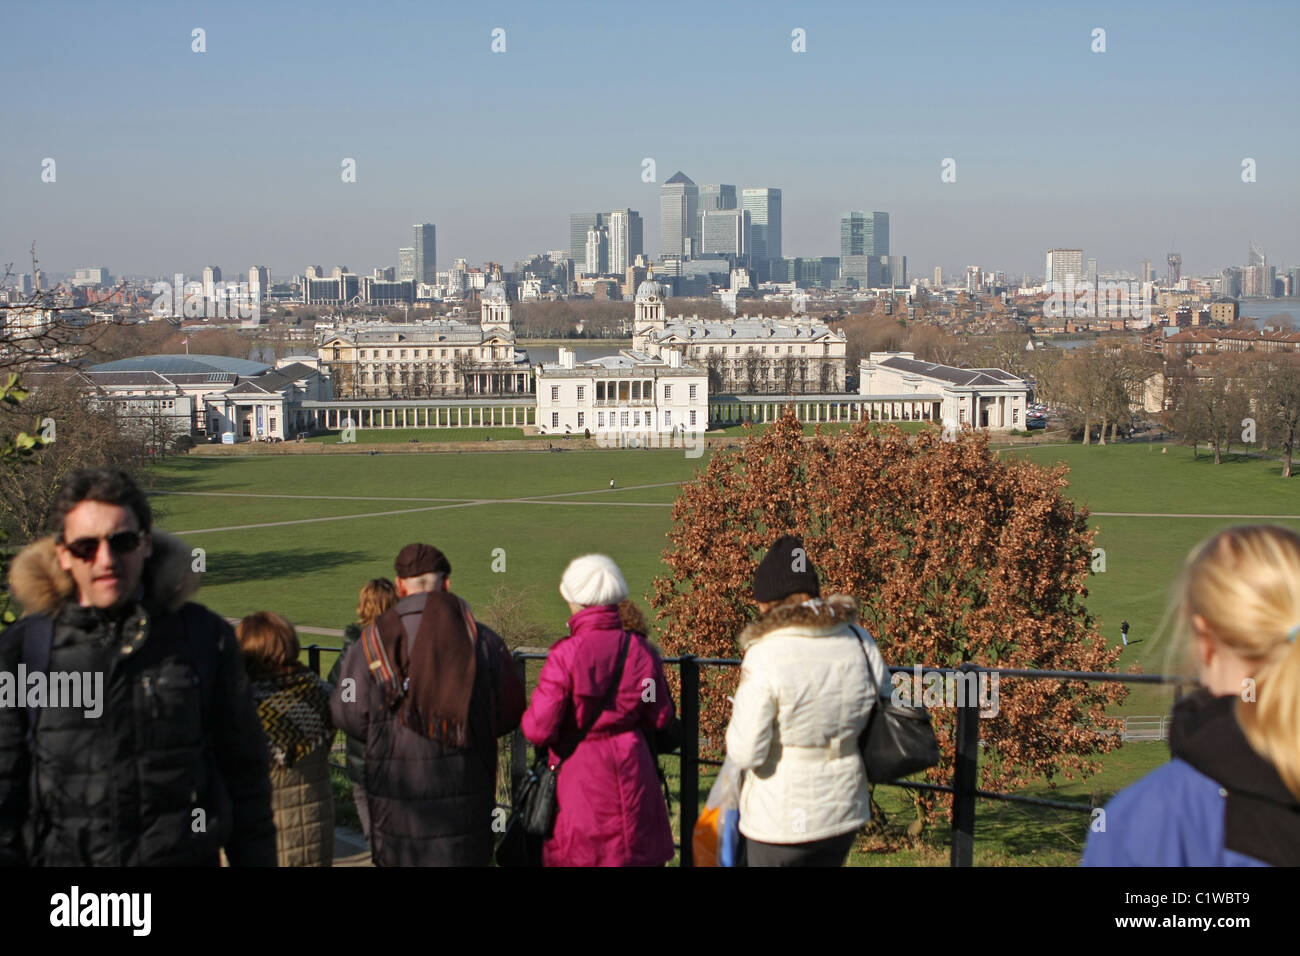 A view across part of London, from Greenwich Park, with people walking to and from the Royal Observatory in the foreground Stock Photo